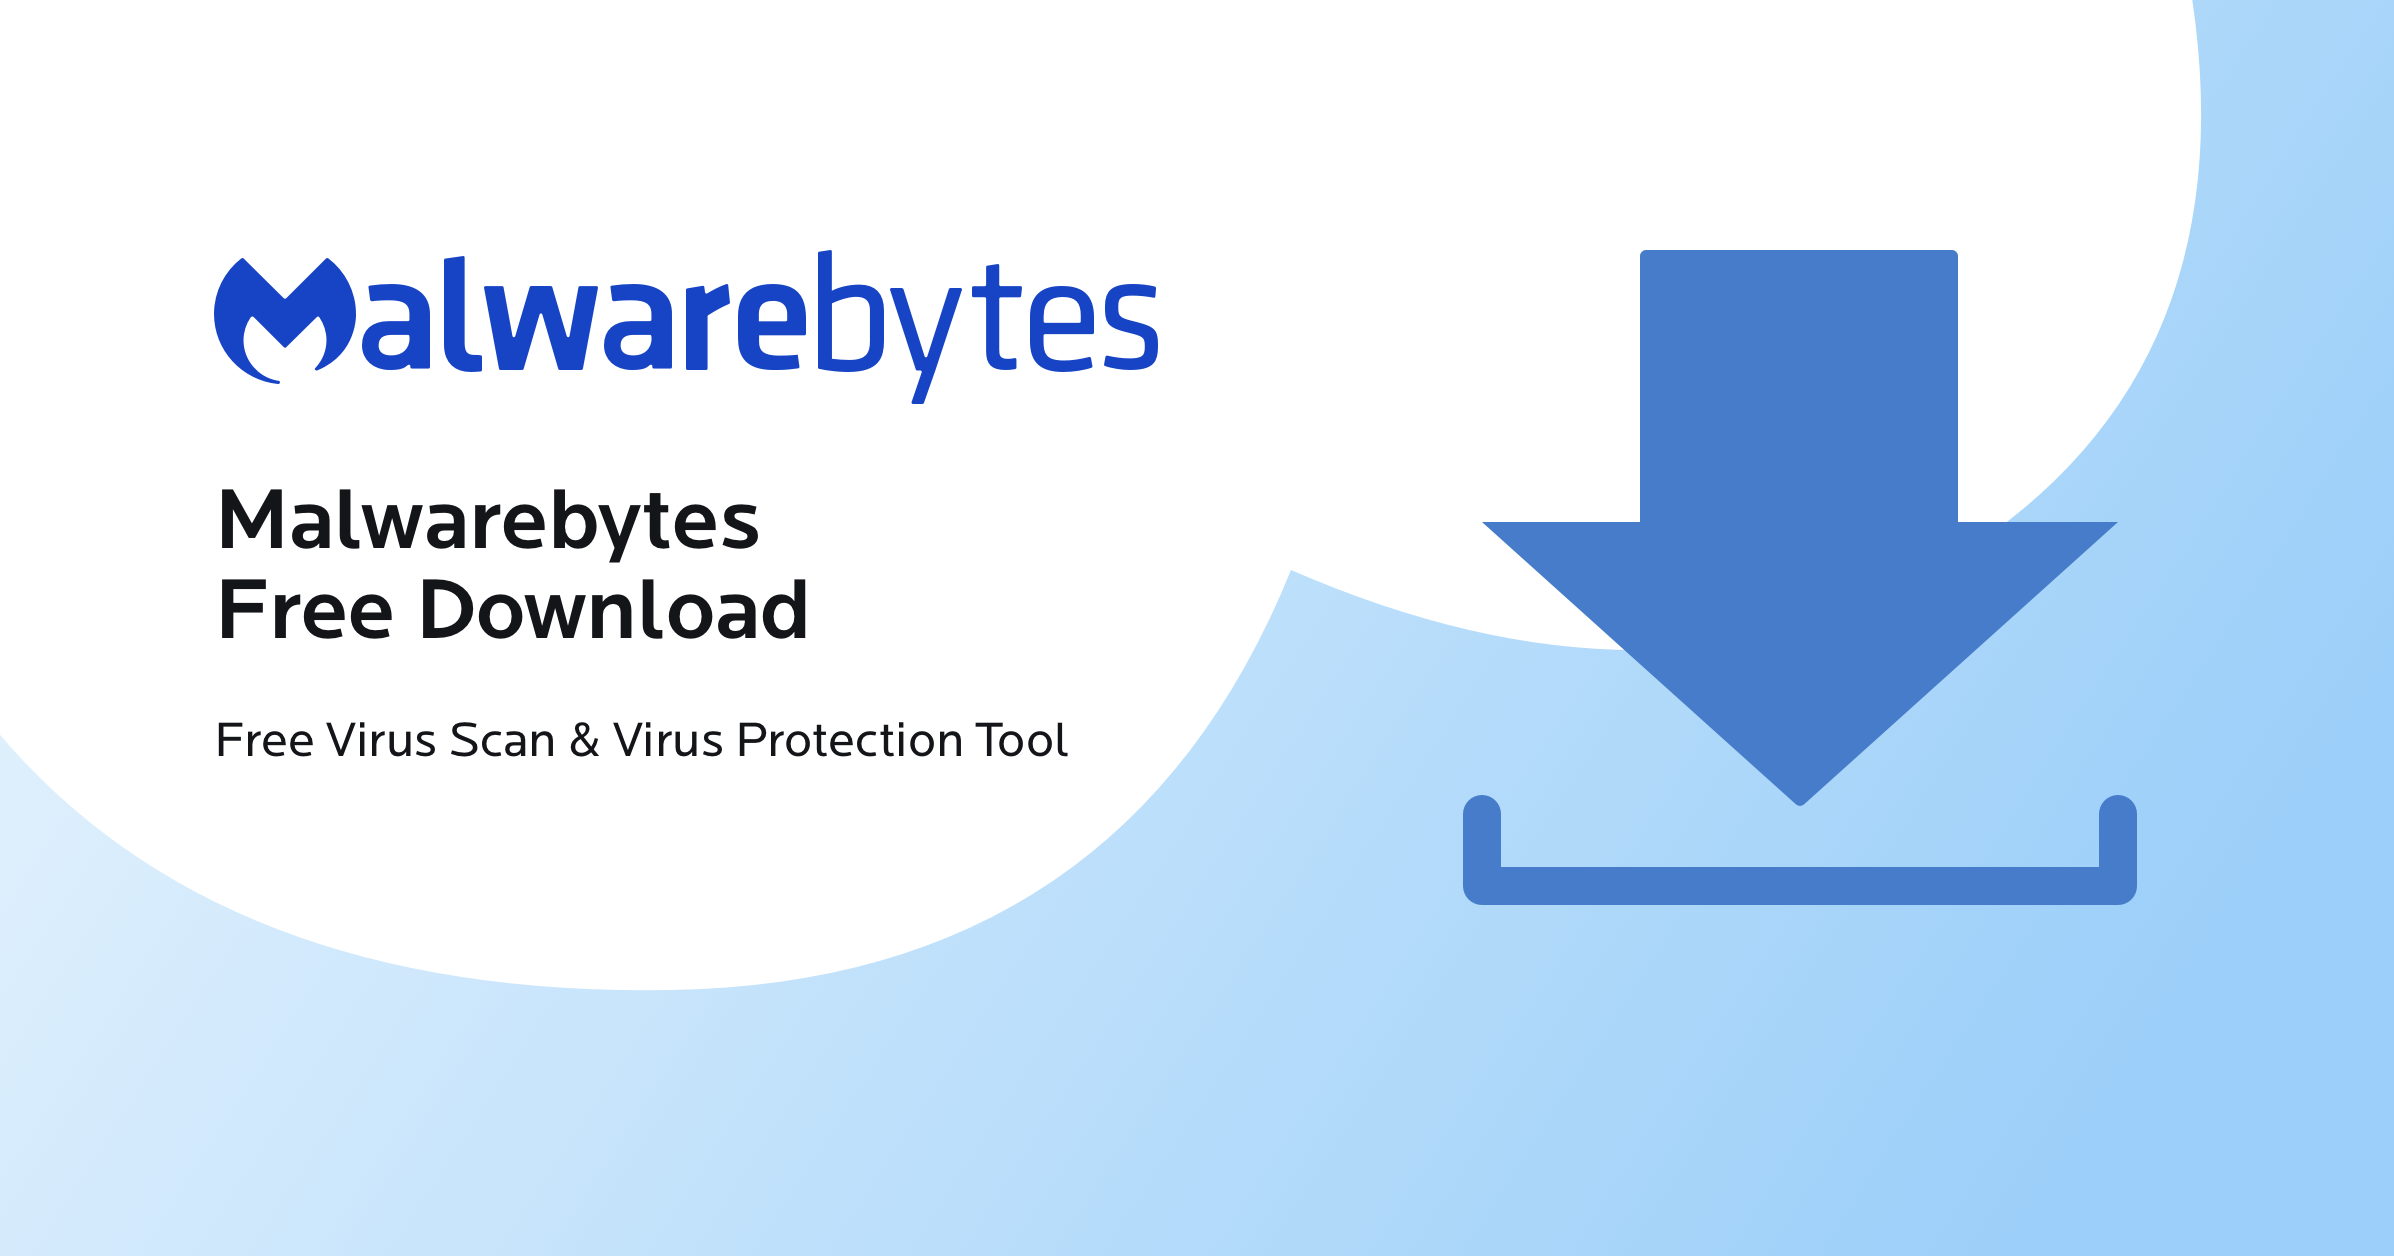 Download and install a reputable anti-malware software.
Run a full system scan with the anti-malware software.